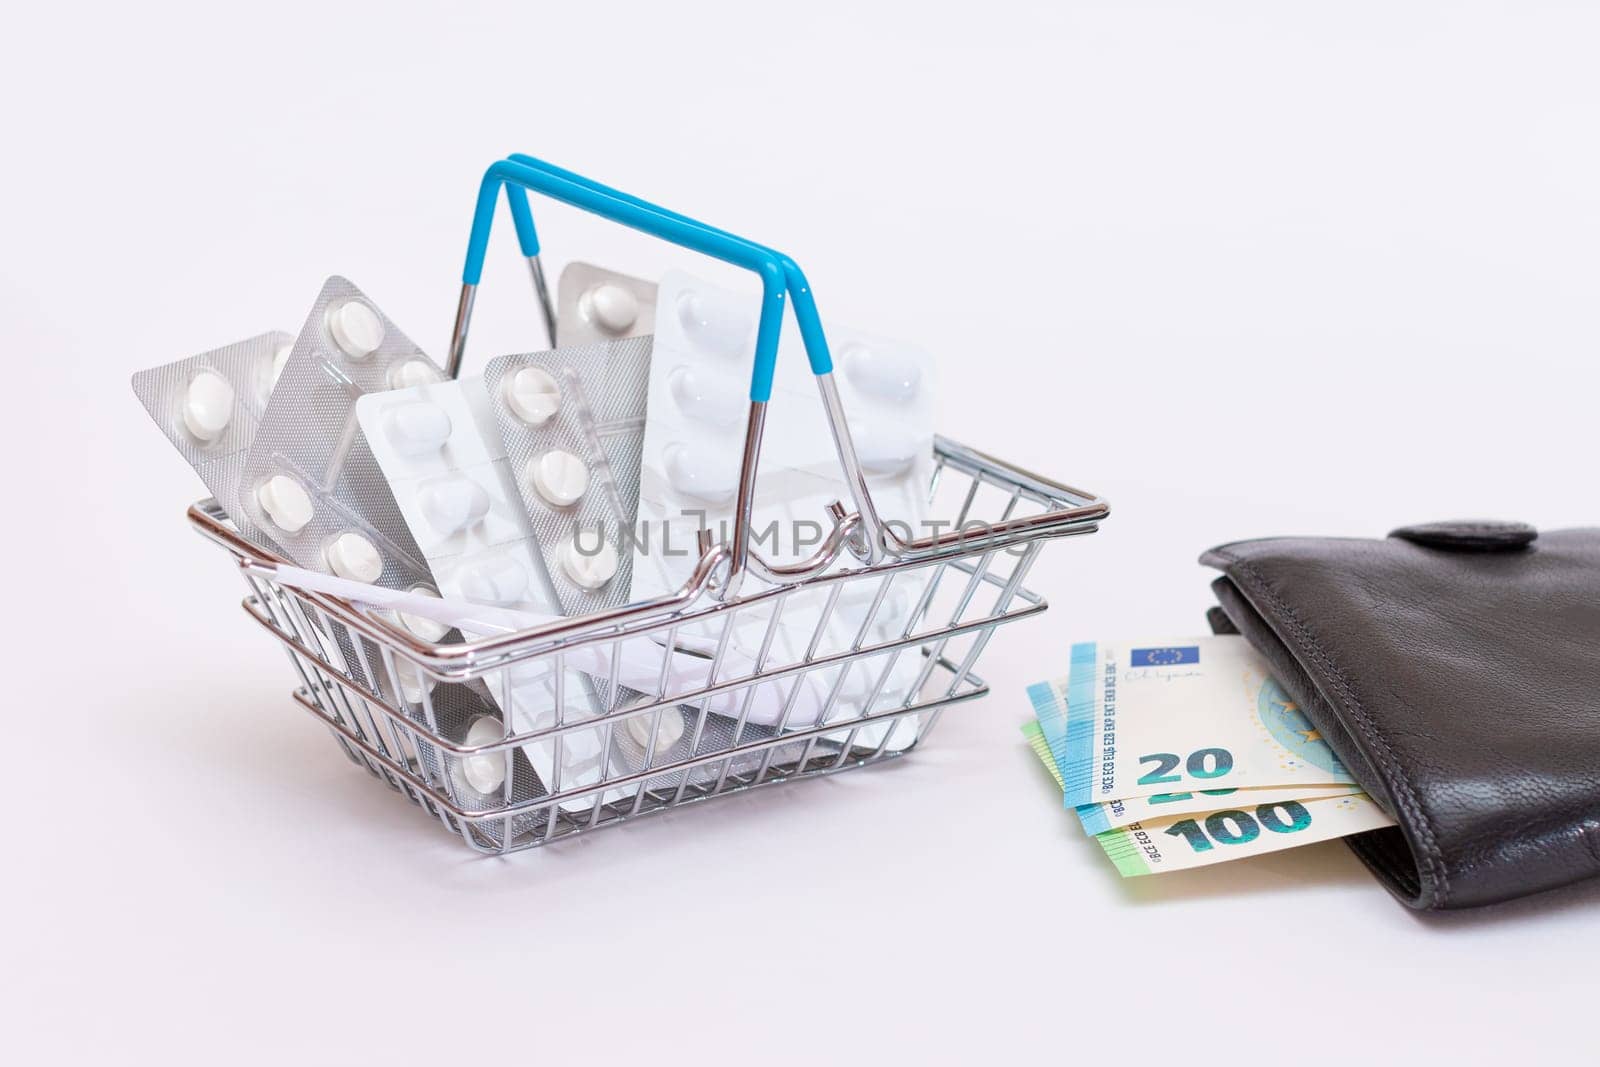 Expensive Medicine and Inflation Concept: Pills and Capsules in a Shopping Basket and Black Wallet with Euro Money on White Table. Global Pharmaceutical Industry and Big Pharma. Trade in Medicines